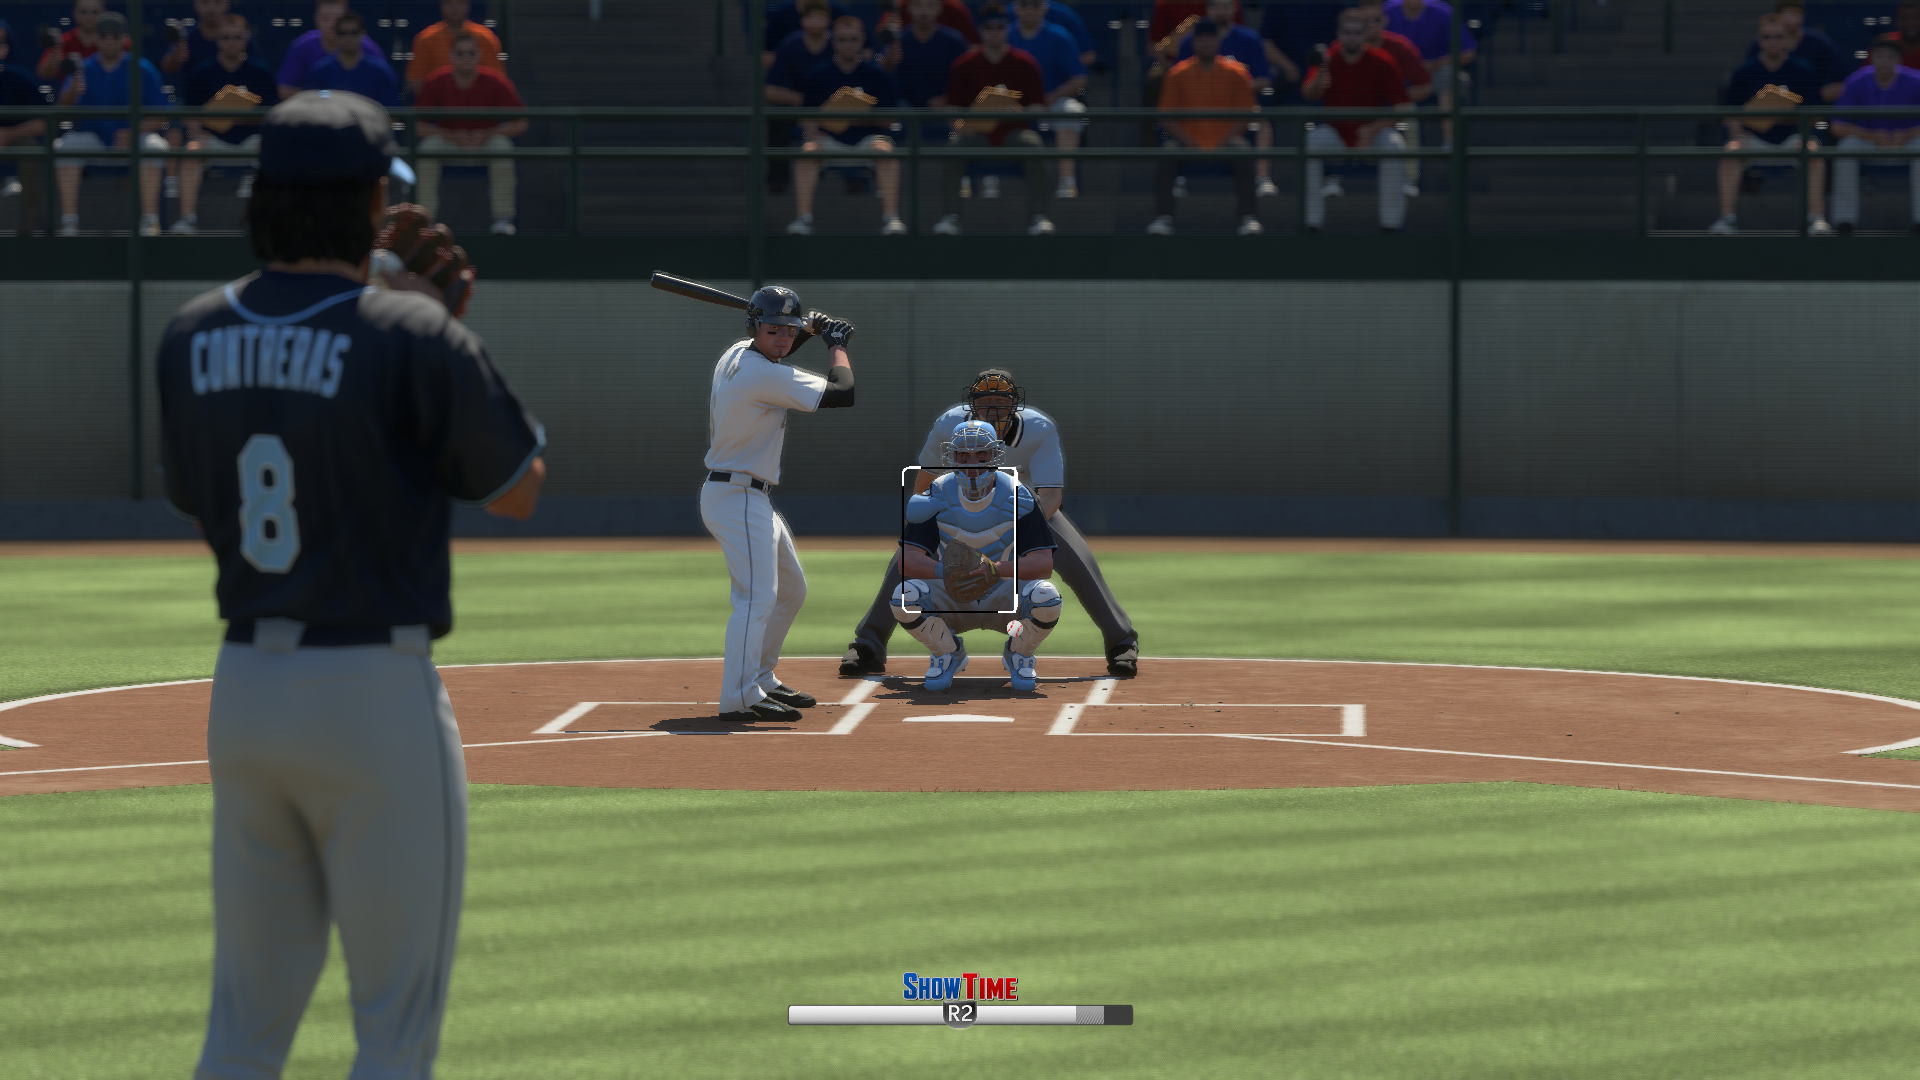 Mlb The Show 16 Review 30